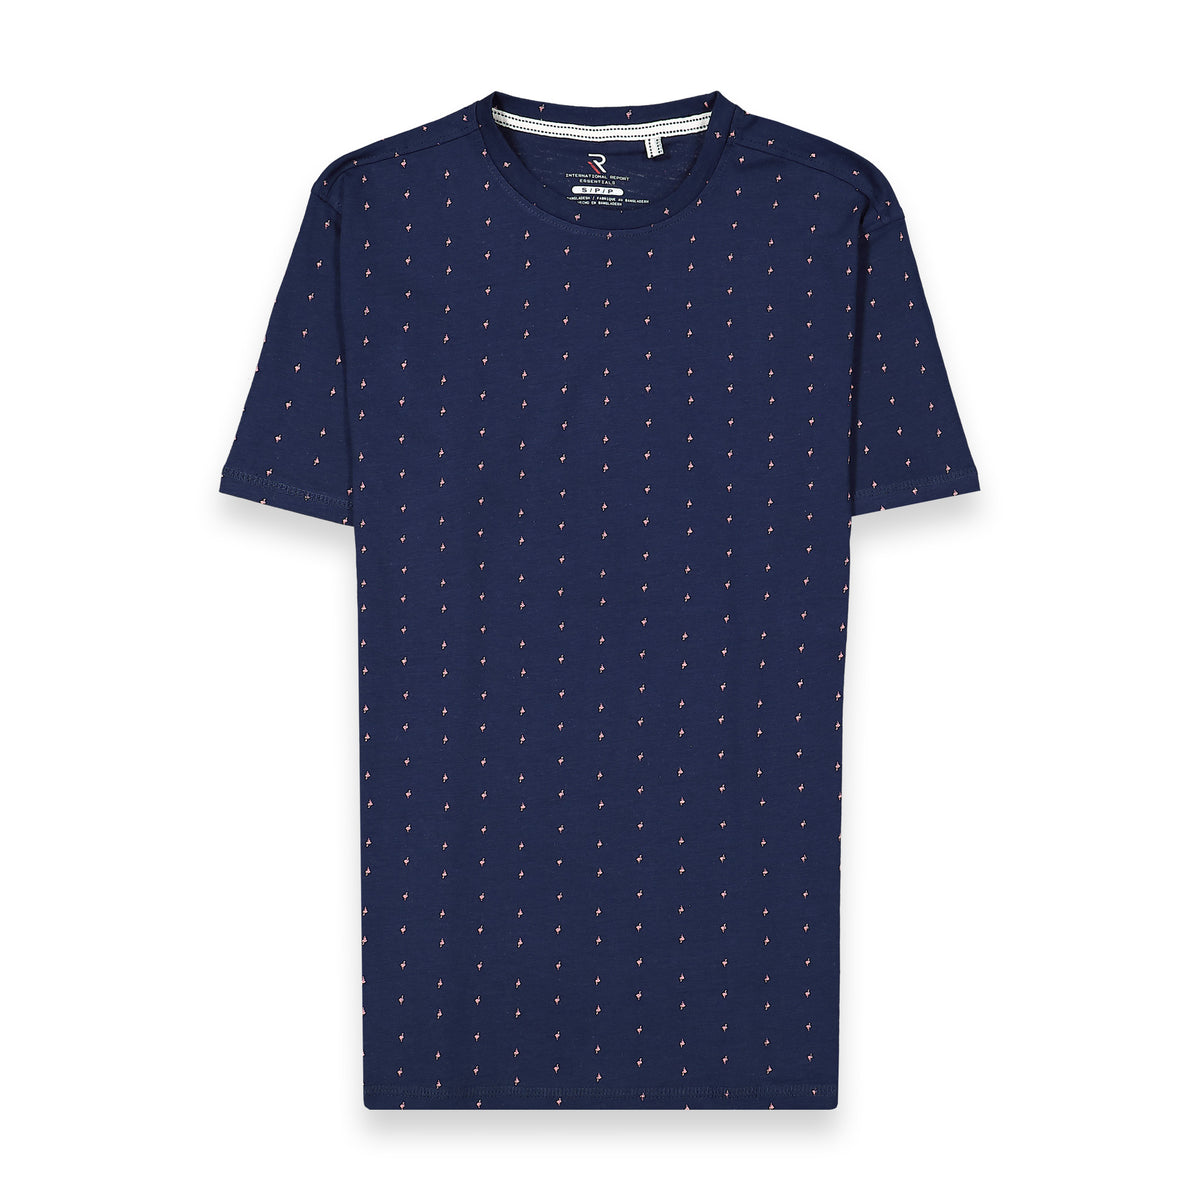 Front View of Short Sleeve Shirt with Flamingo Print in Navy